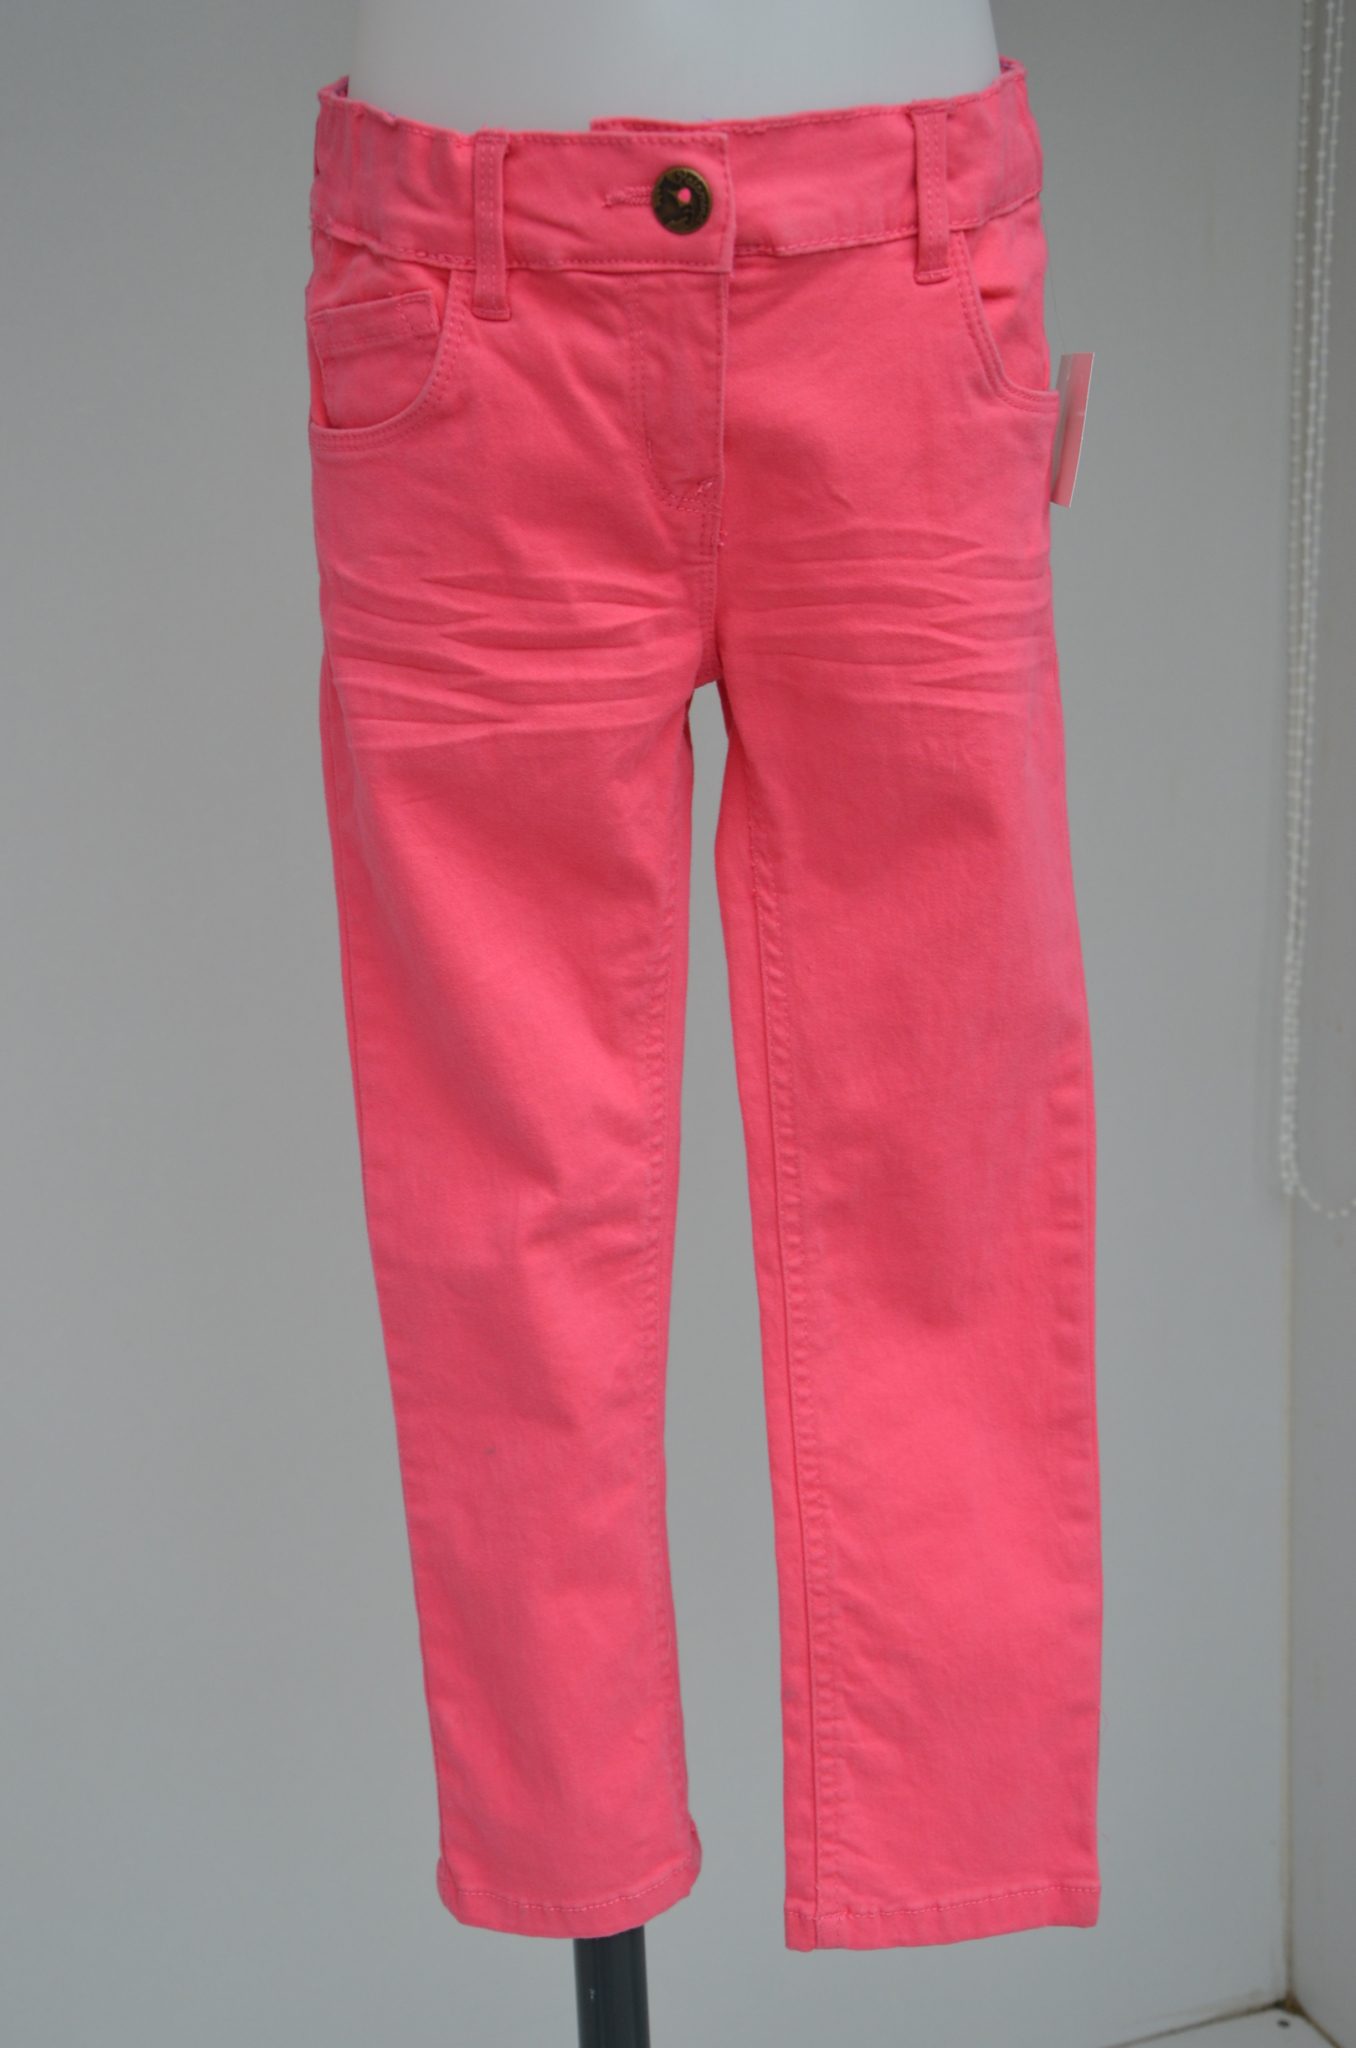 Girls Jeans Pink - Clothes Stocklots